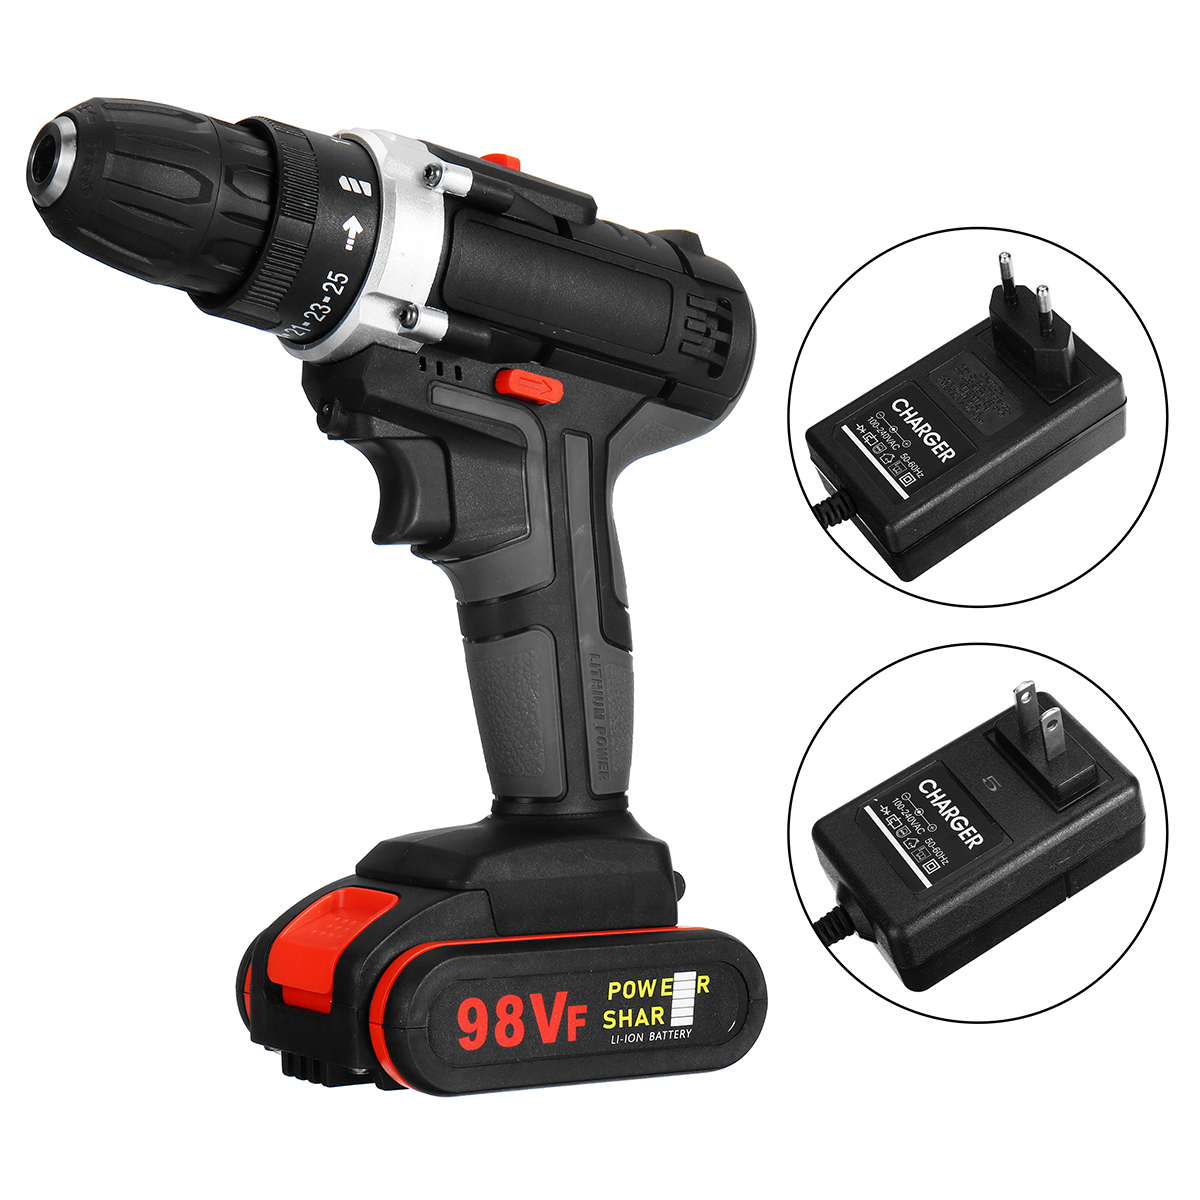 98VF-Cordless-Electric-Impact-Drill-Screwdriver-251-Torque-Rechargeable-Household-Screwdriver-1764622-9